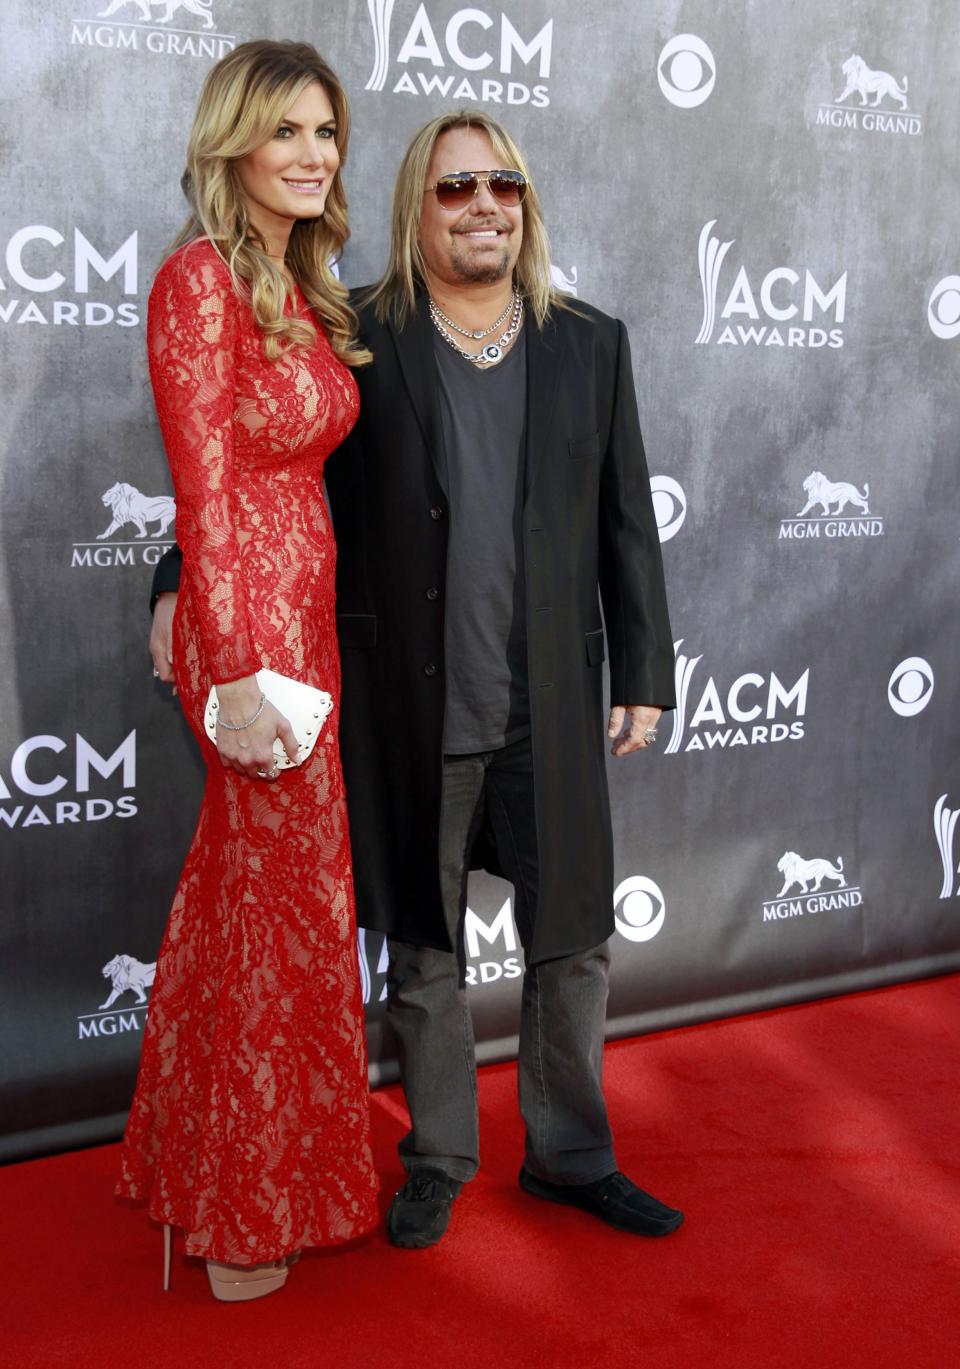 Singer Vince Neil and a guest arrive at the 49th Annual Academy of Country Music Awards in Las Vegas, Nevada April 6, 2014. REUTERS/Steve Marcus (UNITED STATES - Tags: ENTERTAINMENT)(ACMAWARDS-ARRIVALS)